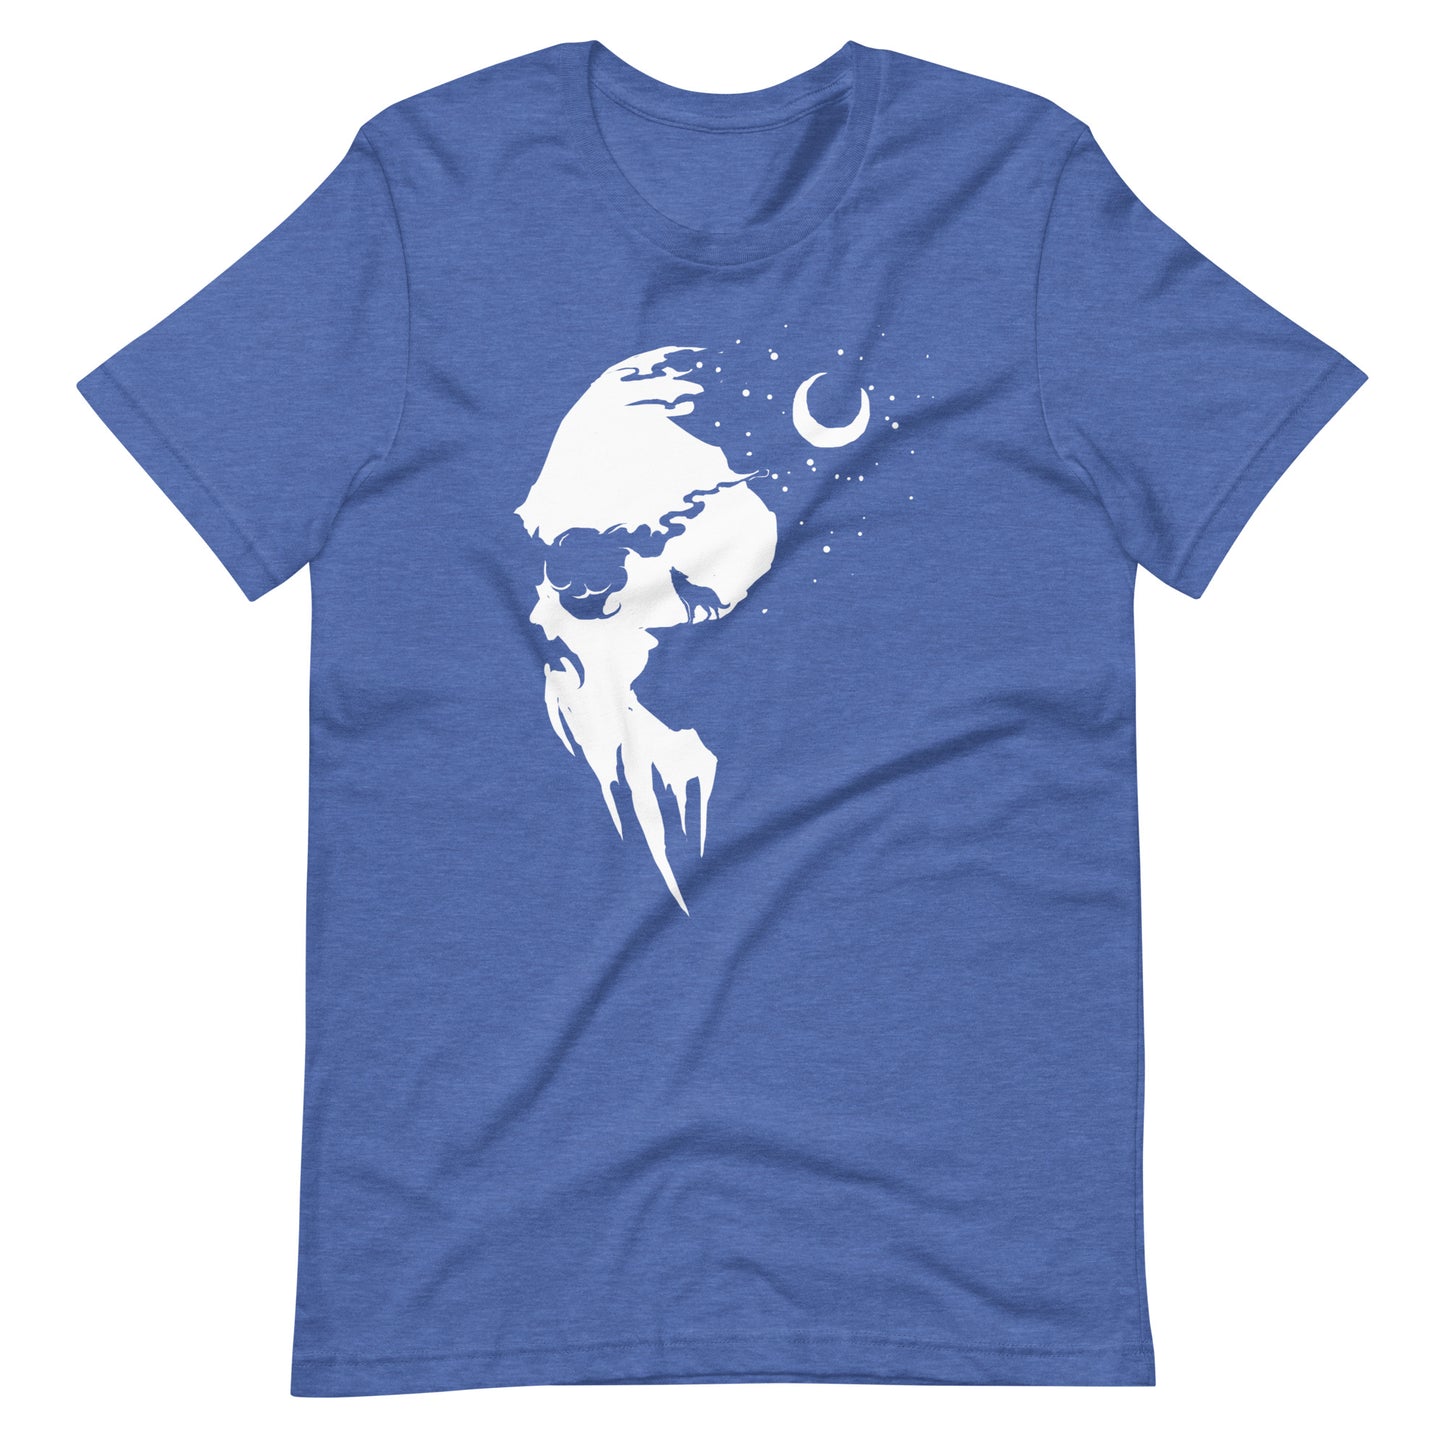 The Night Has Come - Men's t-shirt - Heather True Royal Front